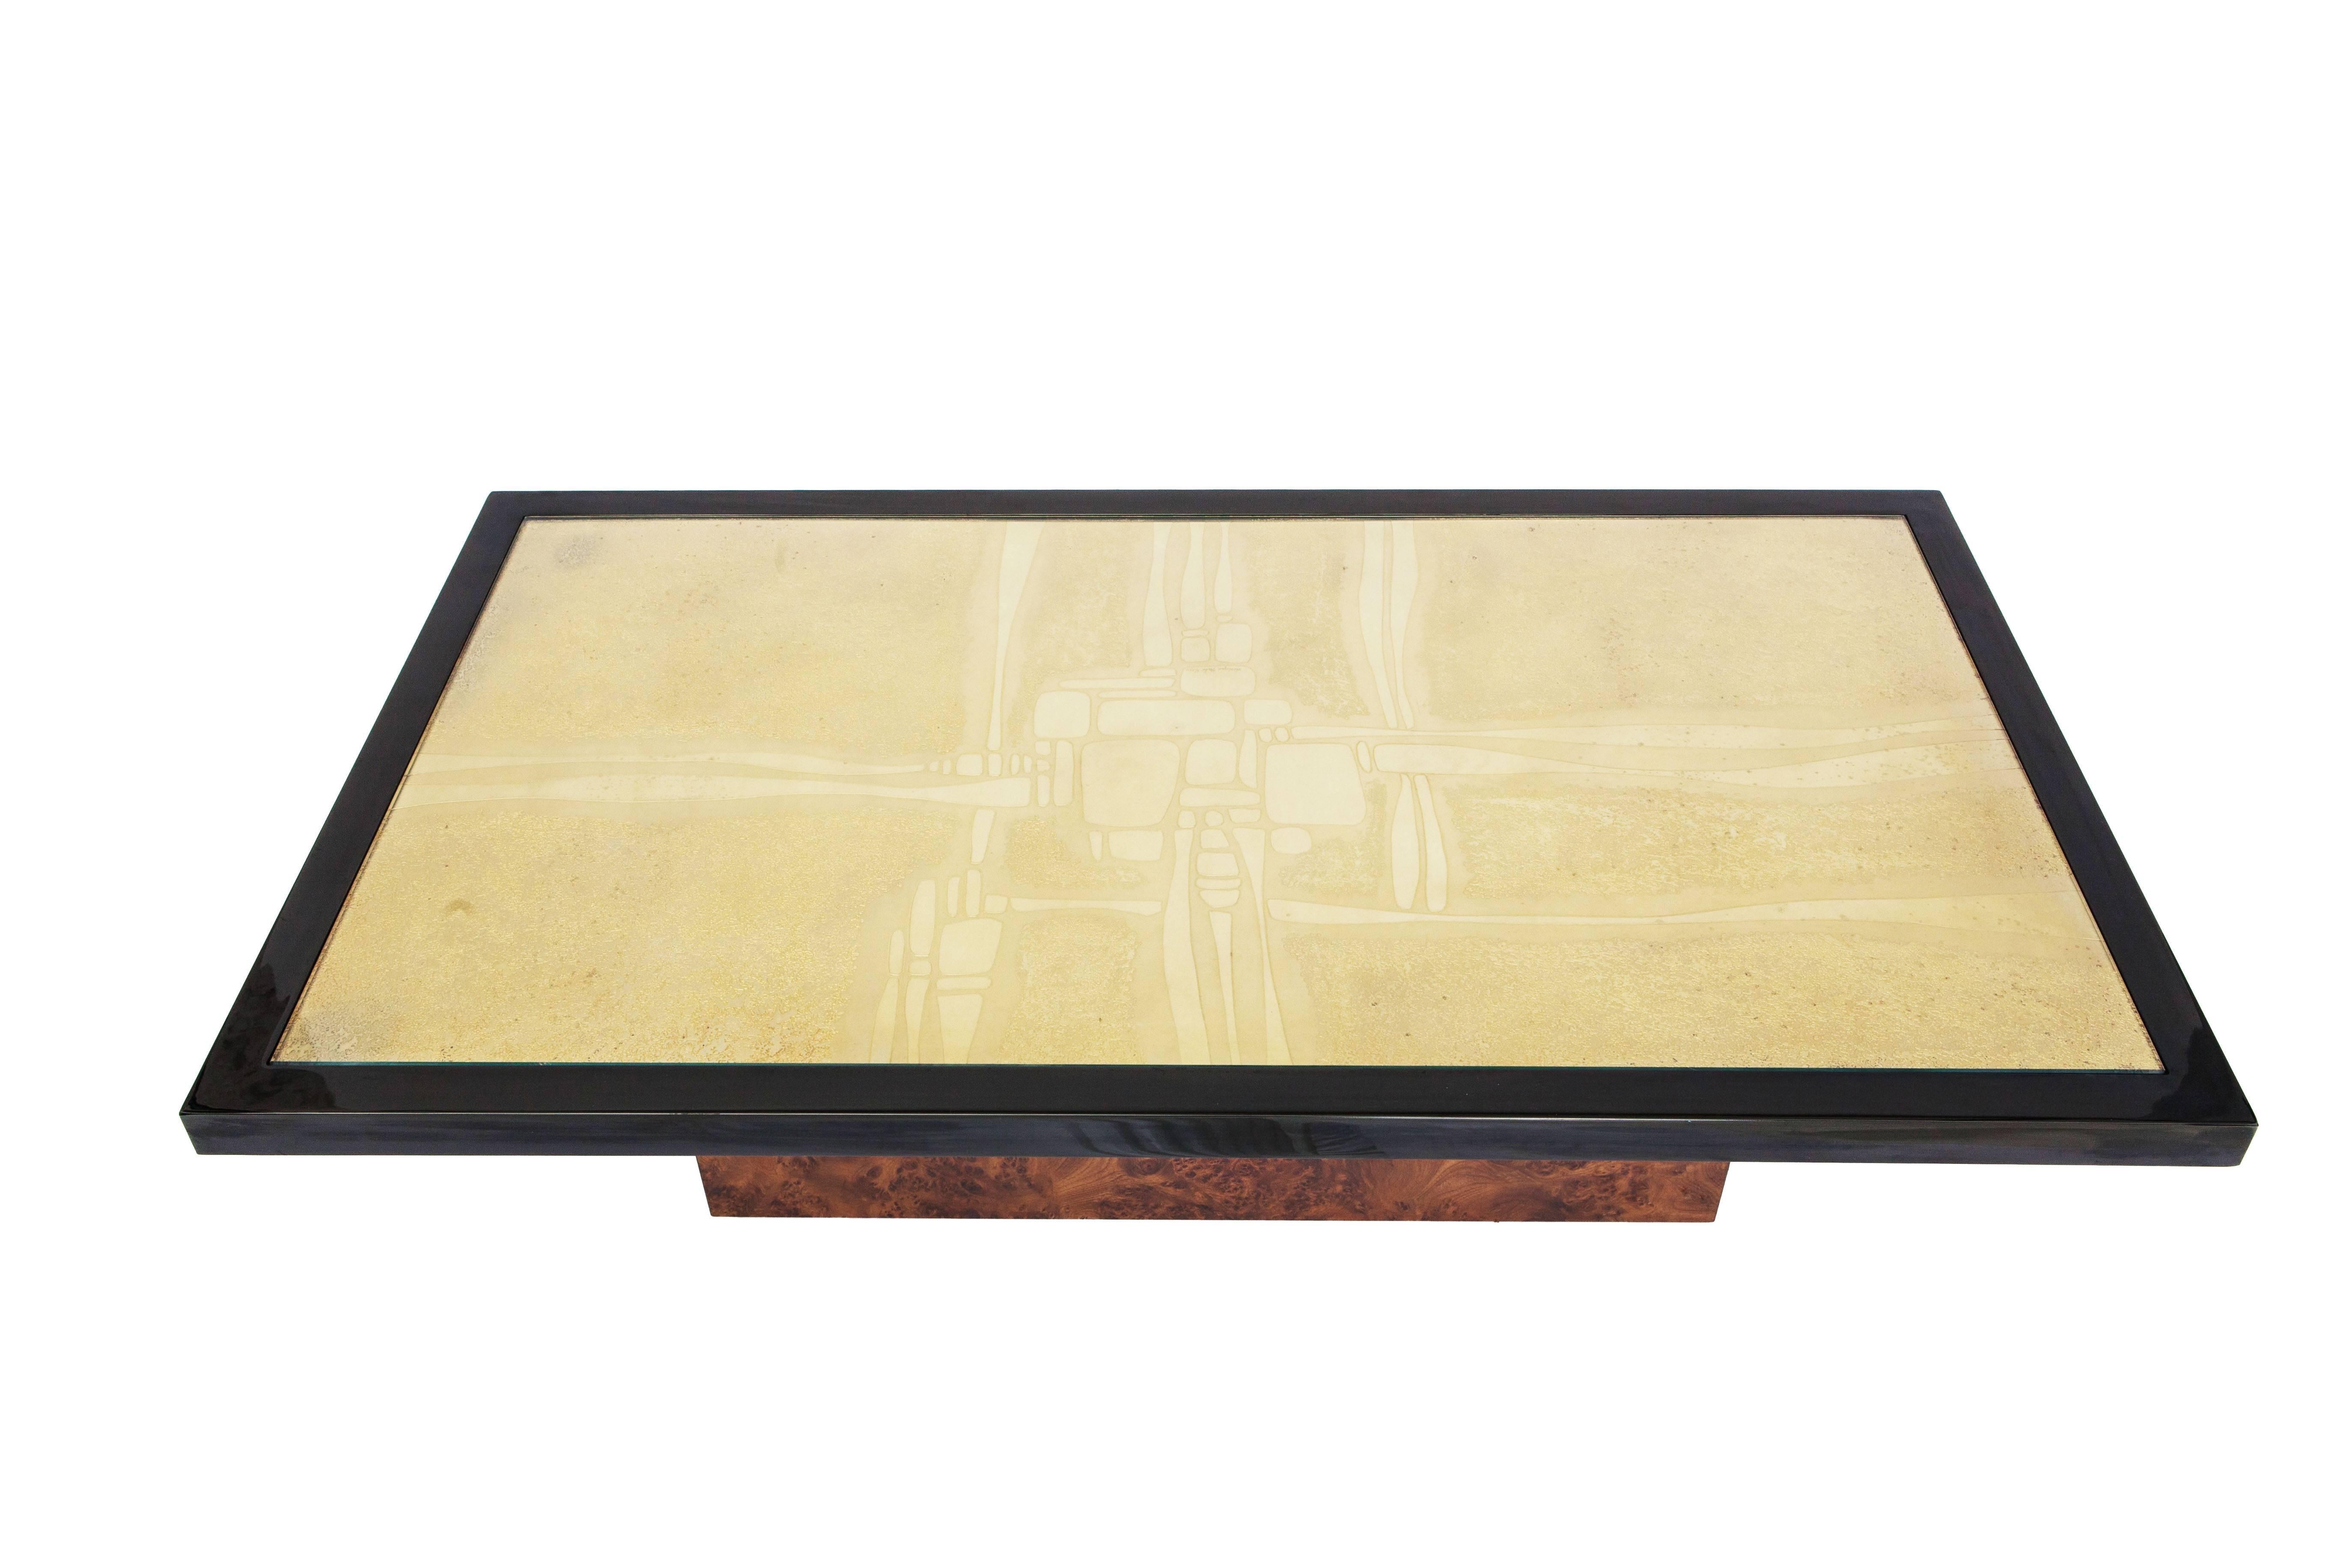 Hollywood Regency Brass etched rectangular coffee table.
Brass etched artwork signed and numbered, Maho 3/250.

Black lacquered frame on burl base.

Belgium, 1970s.

Measures: W 70 cm, D 125 cm, H 37 cm.

Would fit well in an eclectic interior